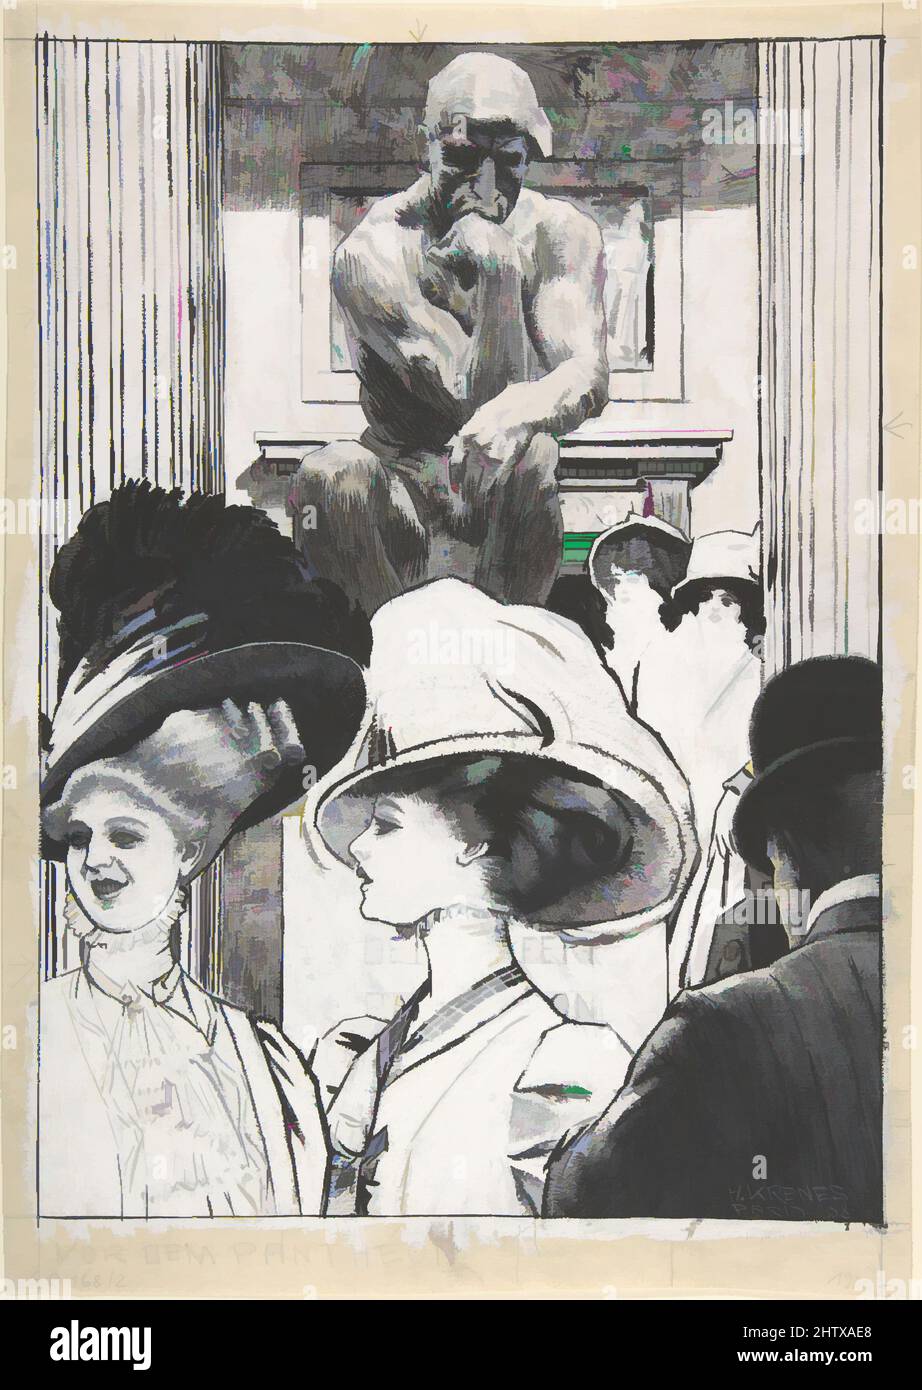 Art inspired by Vor dem Pantheon, 1908, Brush and black ink, white gouache (whiteout, white paint) Touches of silver paint(?), graphite(?), 15 1/2 x 10 15/16 in. (39.4 x 27.8 cm), Drawings, Heinrich Krenes (Austrian, Vienna 1874–1913 Vienna, Classic works modernized by Artotop with a splash of modernity. Shapes, color and value, eye-catching visual impact on art. Emotions through freedom of artworks in a contemporary way. A timeless message pursuing a wildly creative new direction. Artists turning to the digital medium and creating the Artotop NFT Stock Photo